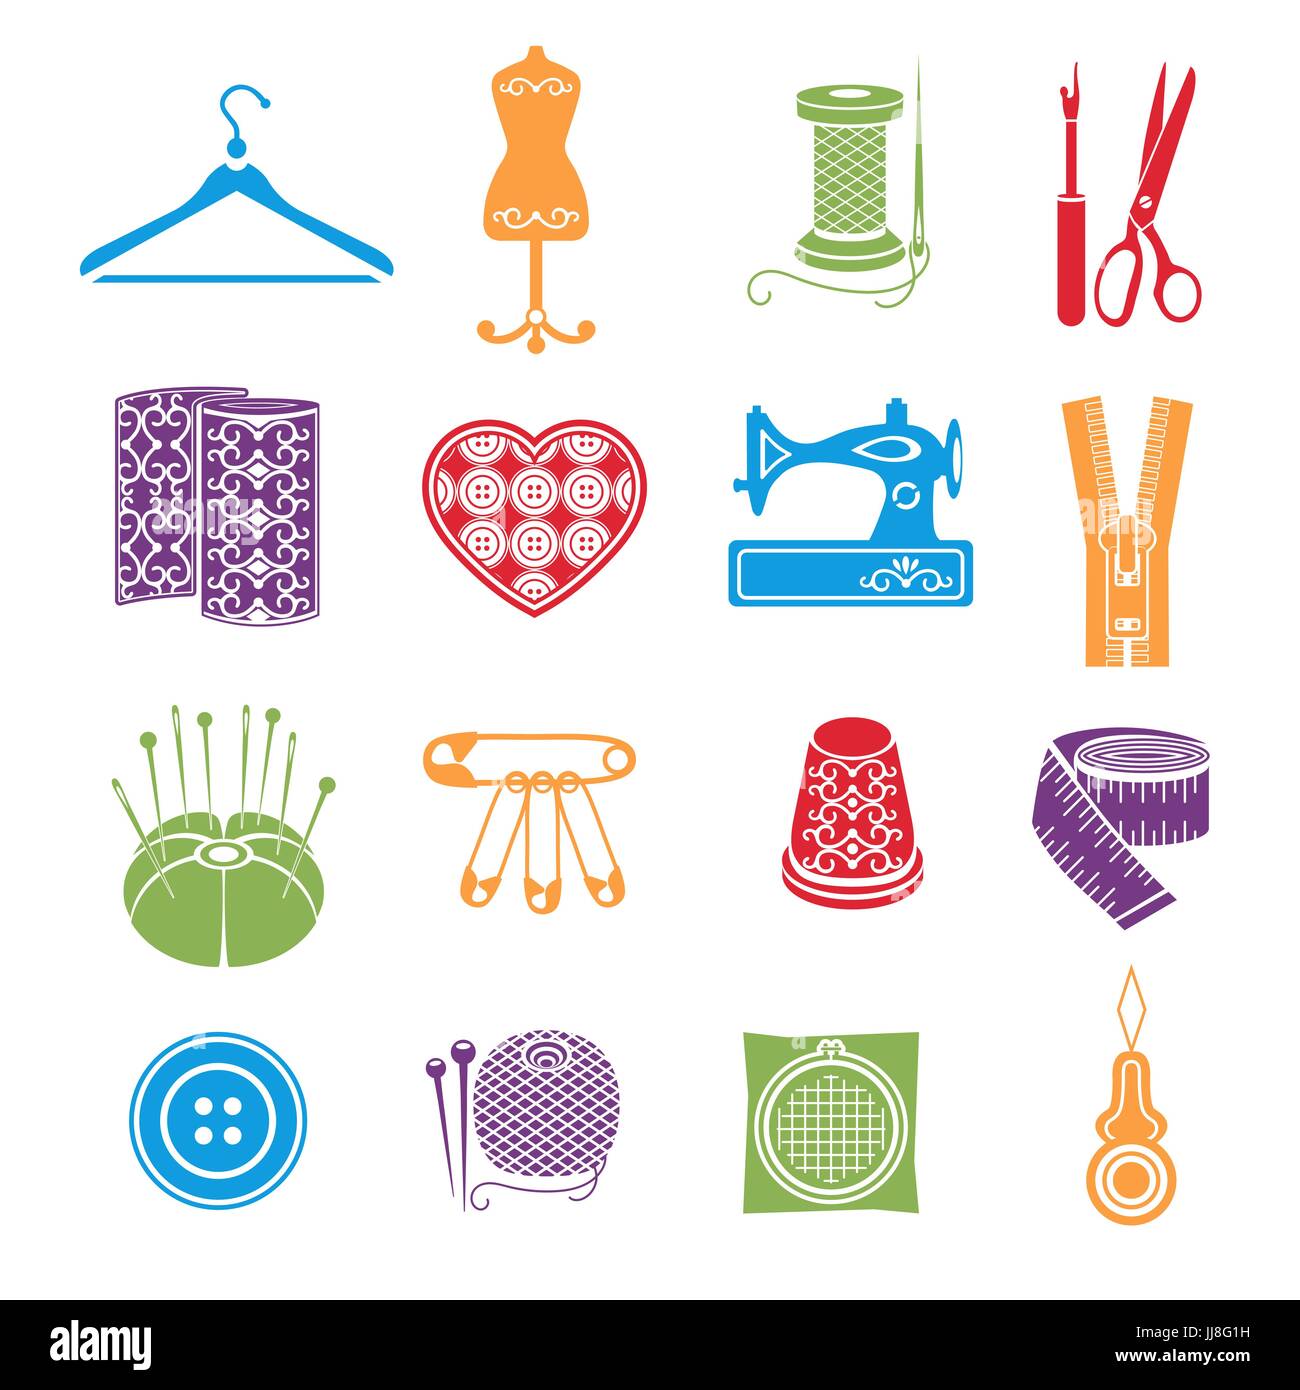 Vintage Handdrawn Sewing Tools Vector Icons Isolated Drawing Accessories  Vector, Isolated, Drawing, Accessories PNG and Vector with Transparent  Background for Free Download